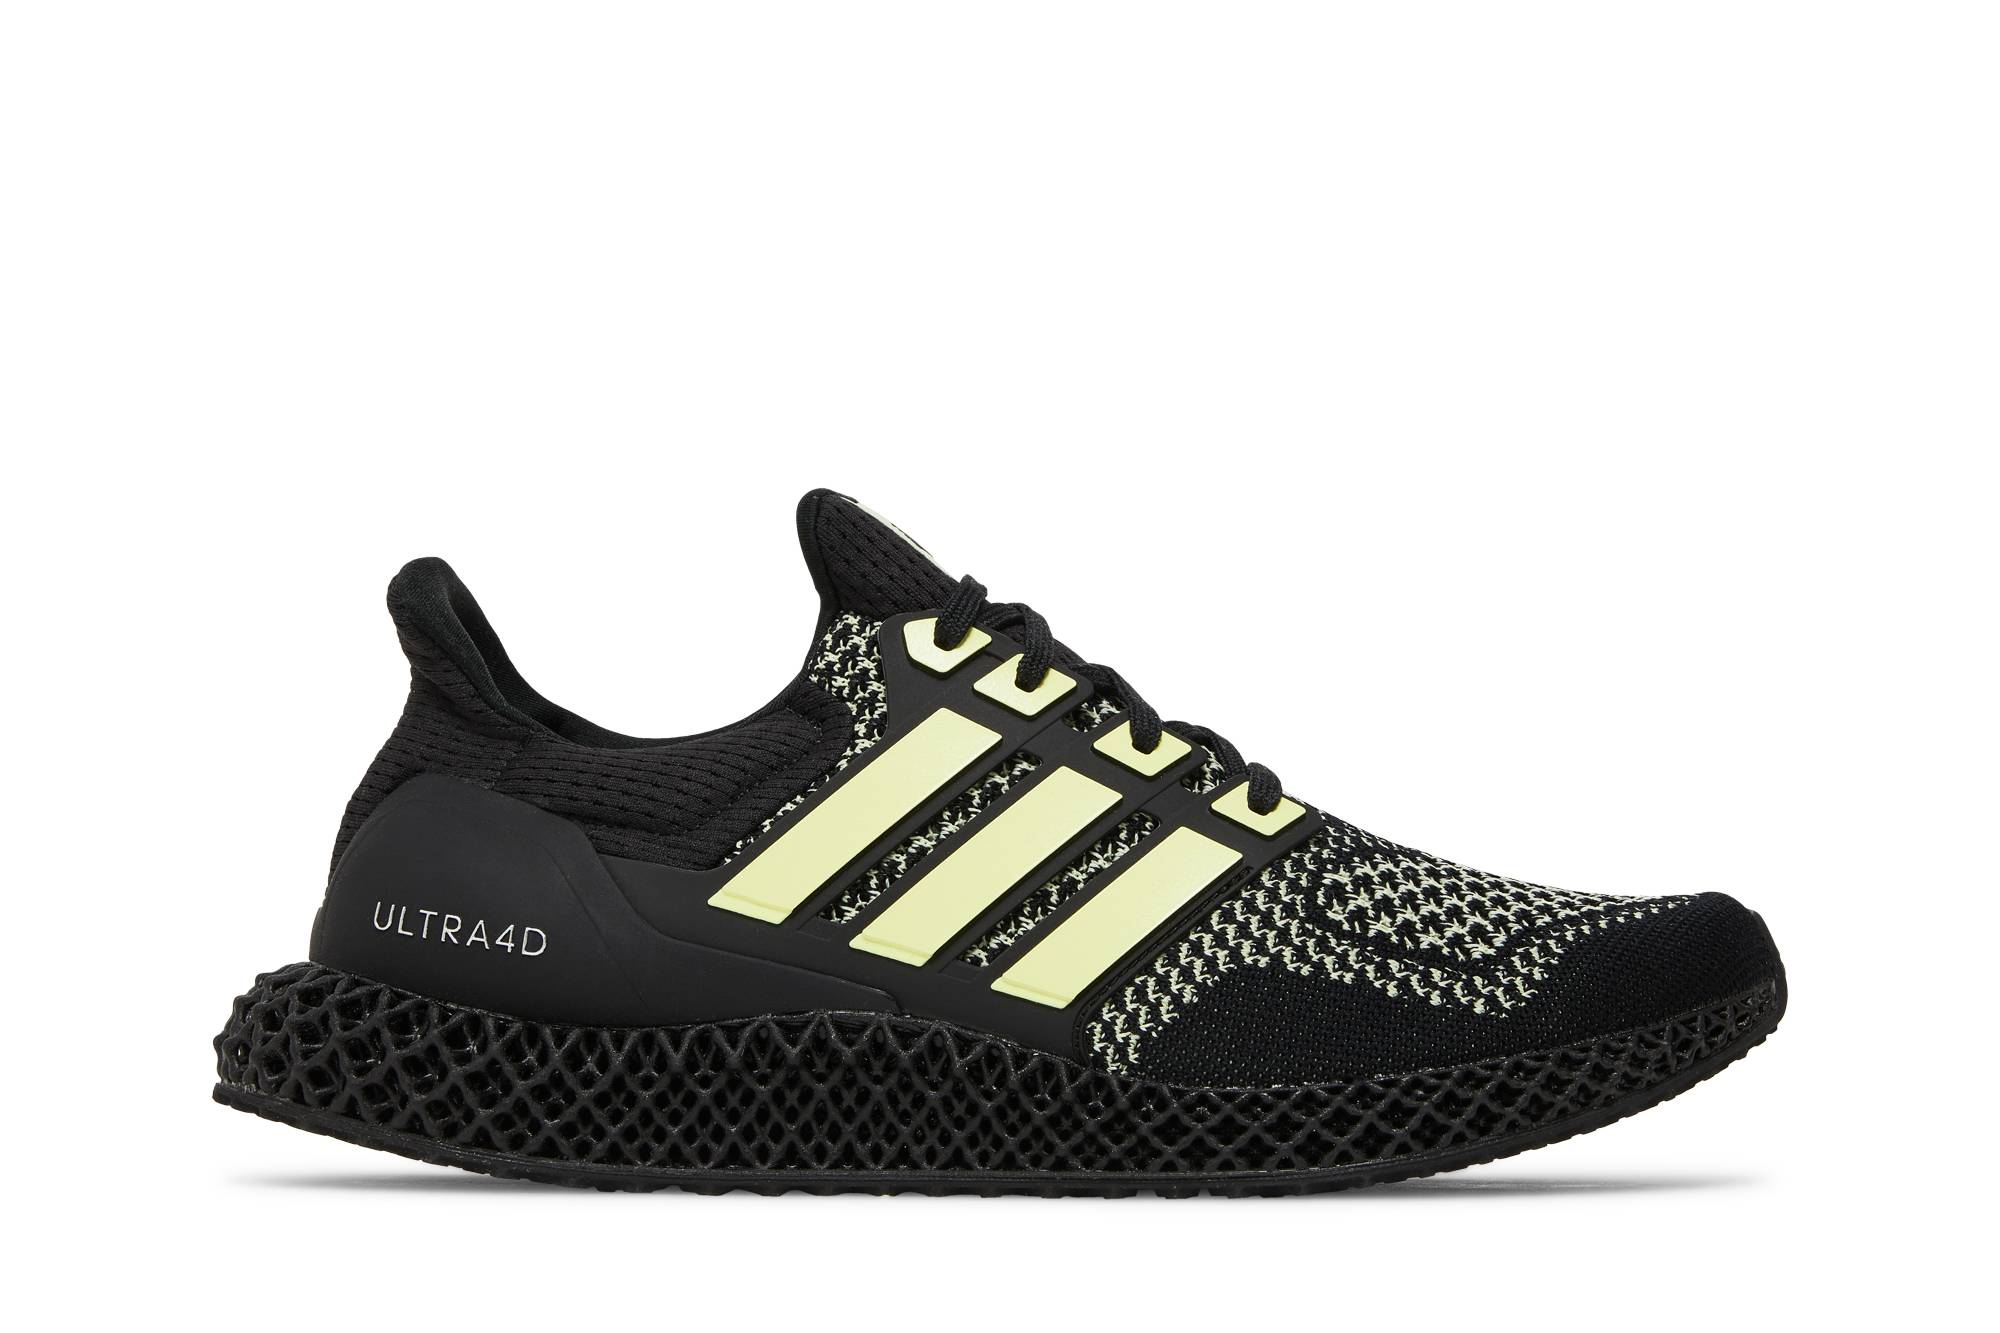 Adidas Ultra 4D - Black Almost Lime (GZ4499)